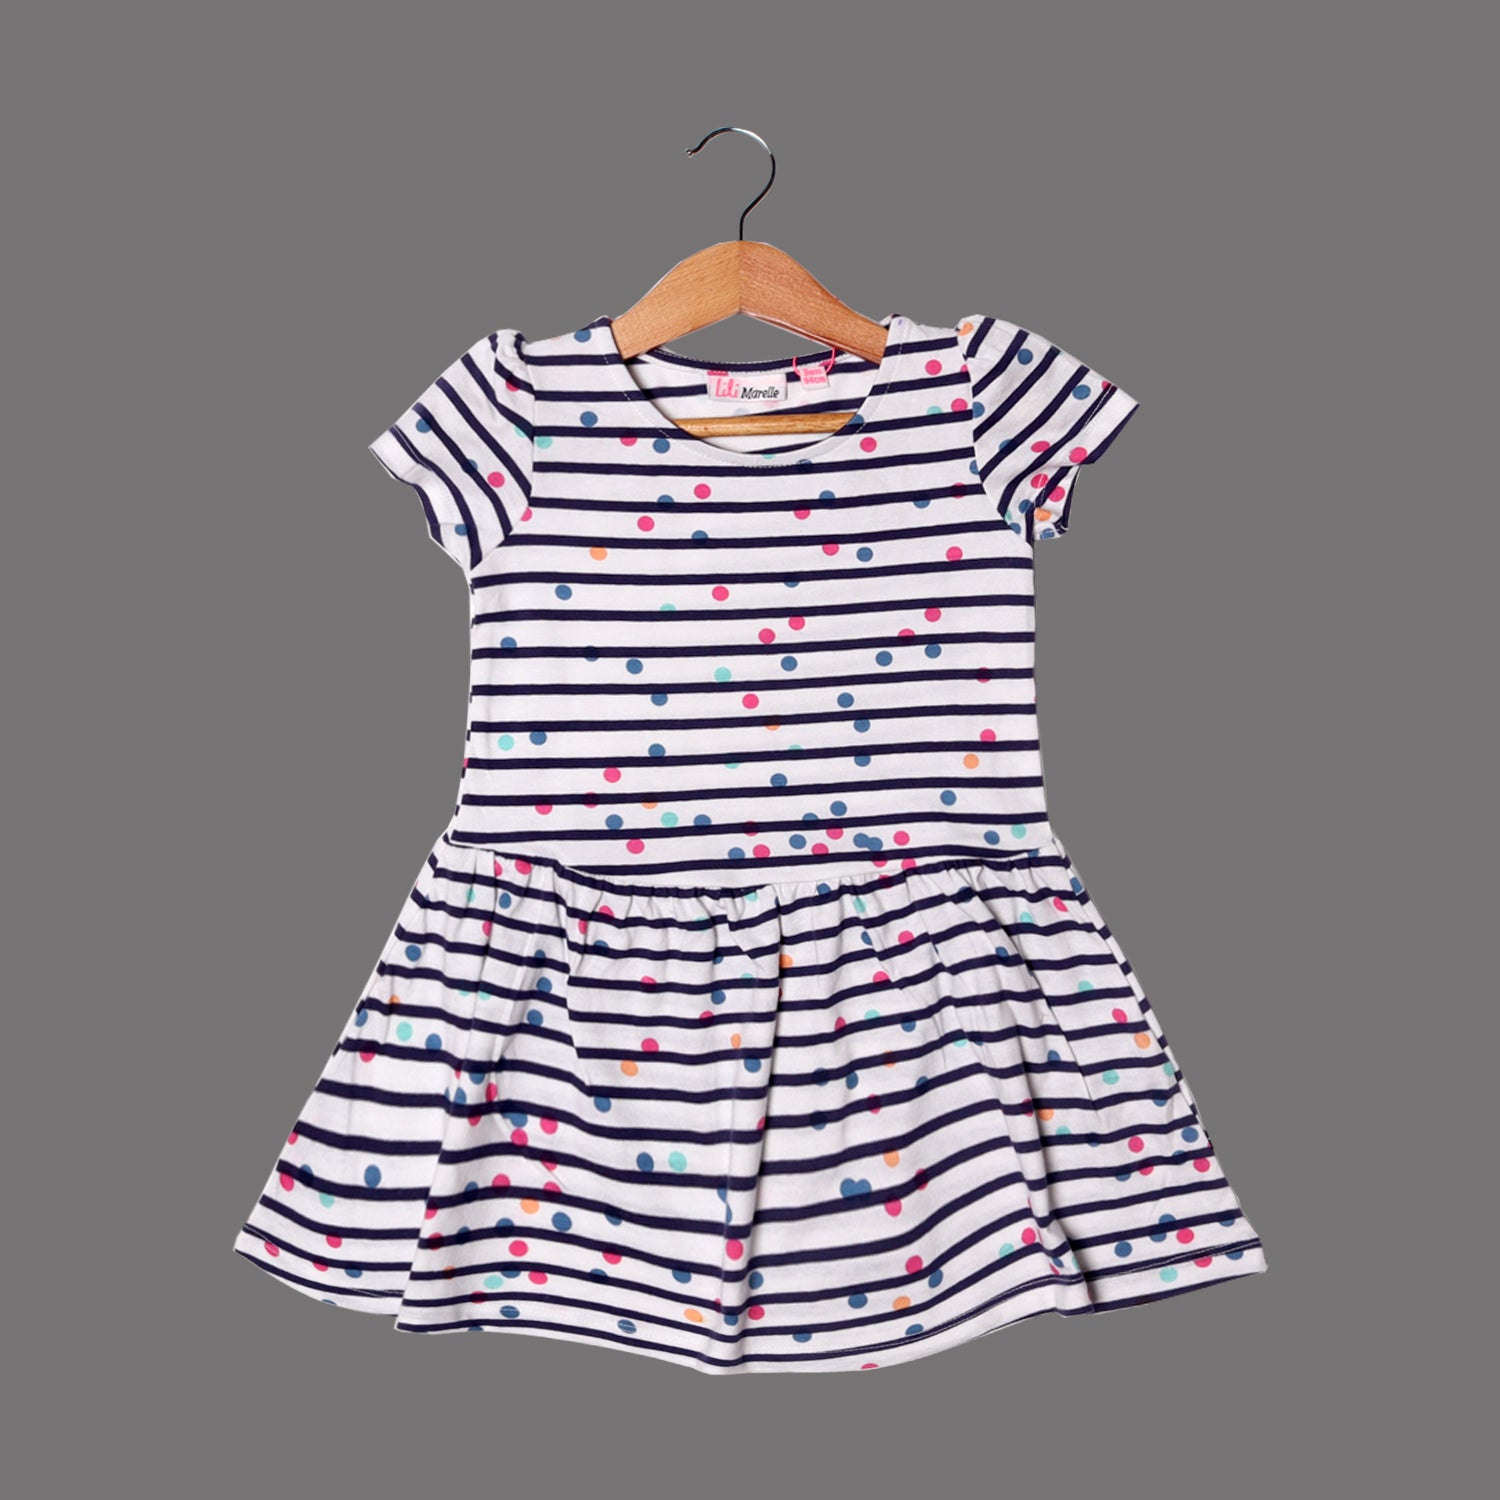 WHITE STRIPES & POLKA DOTS PRINTED FROCK FOR GIRLS